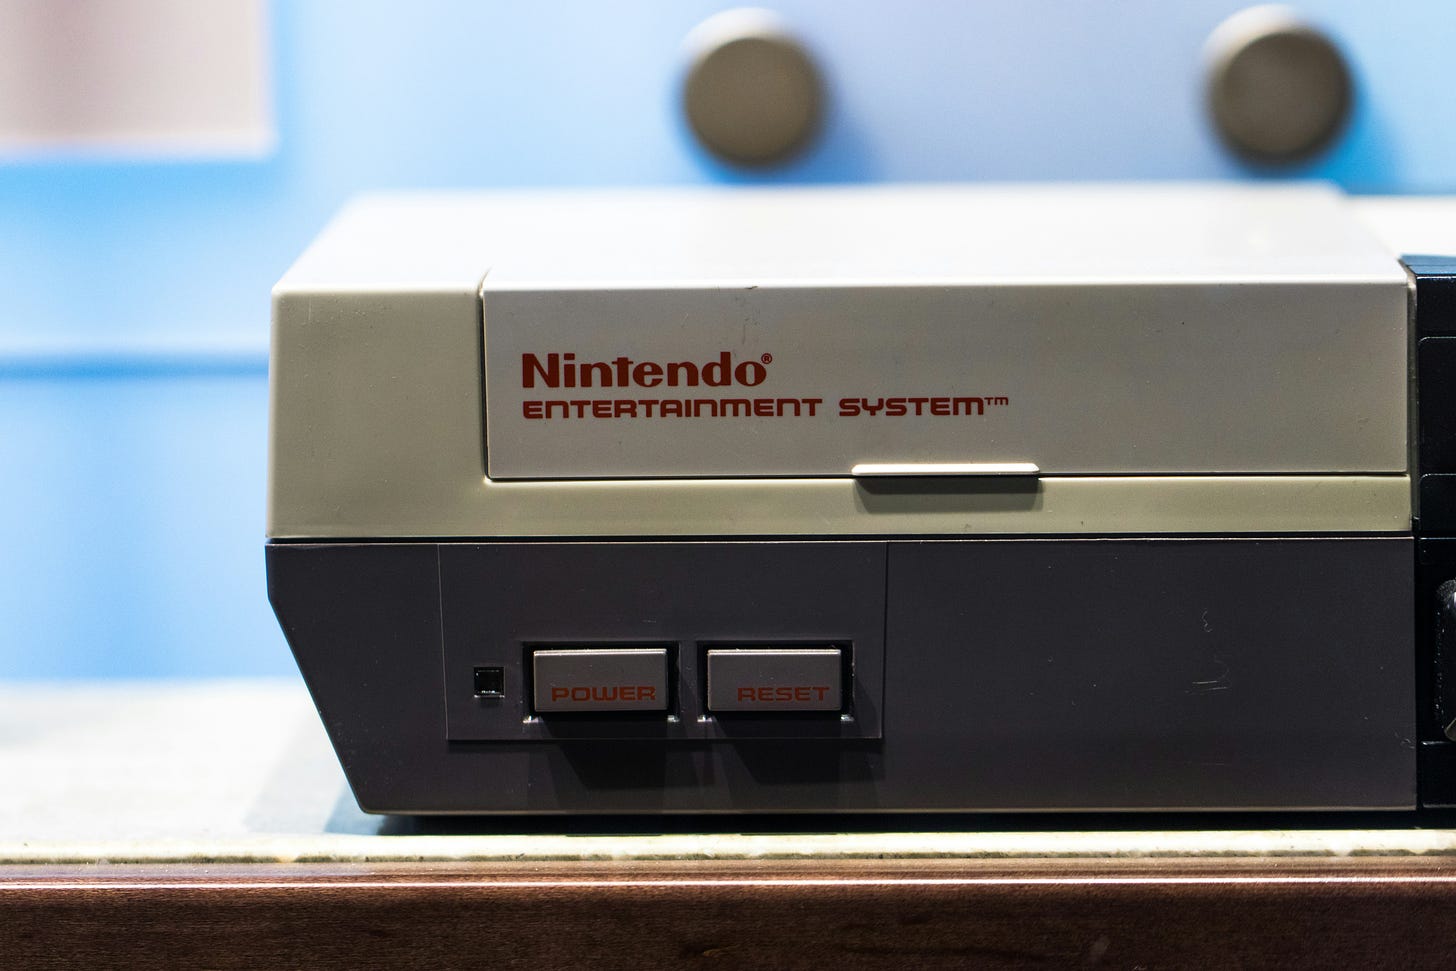 A photograph of the Nintendo Entertainment System